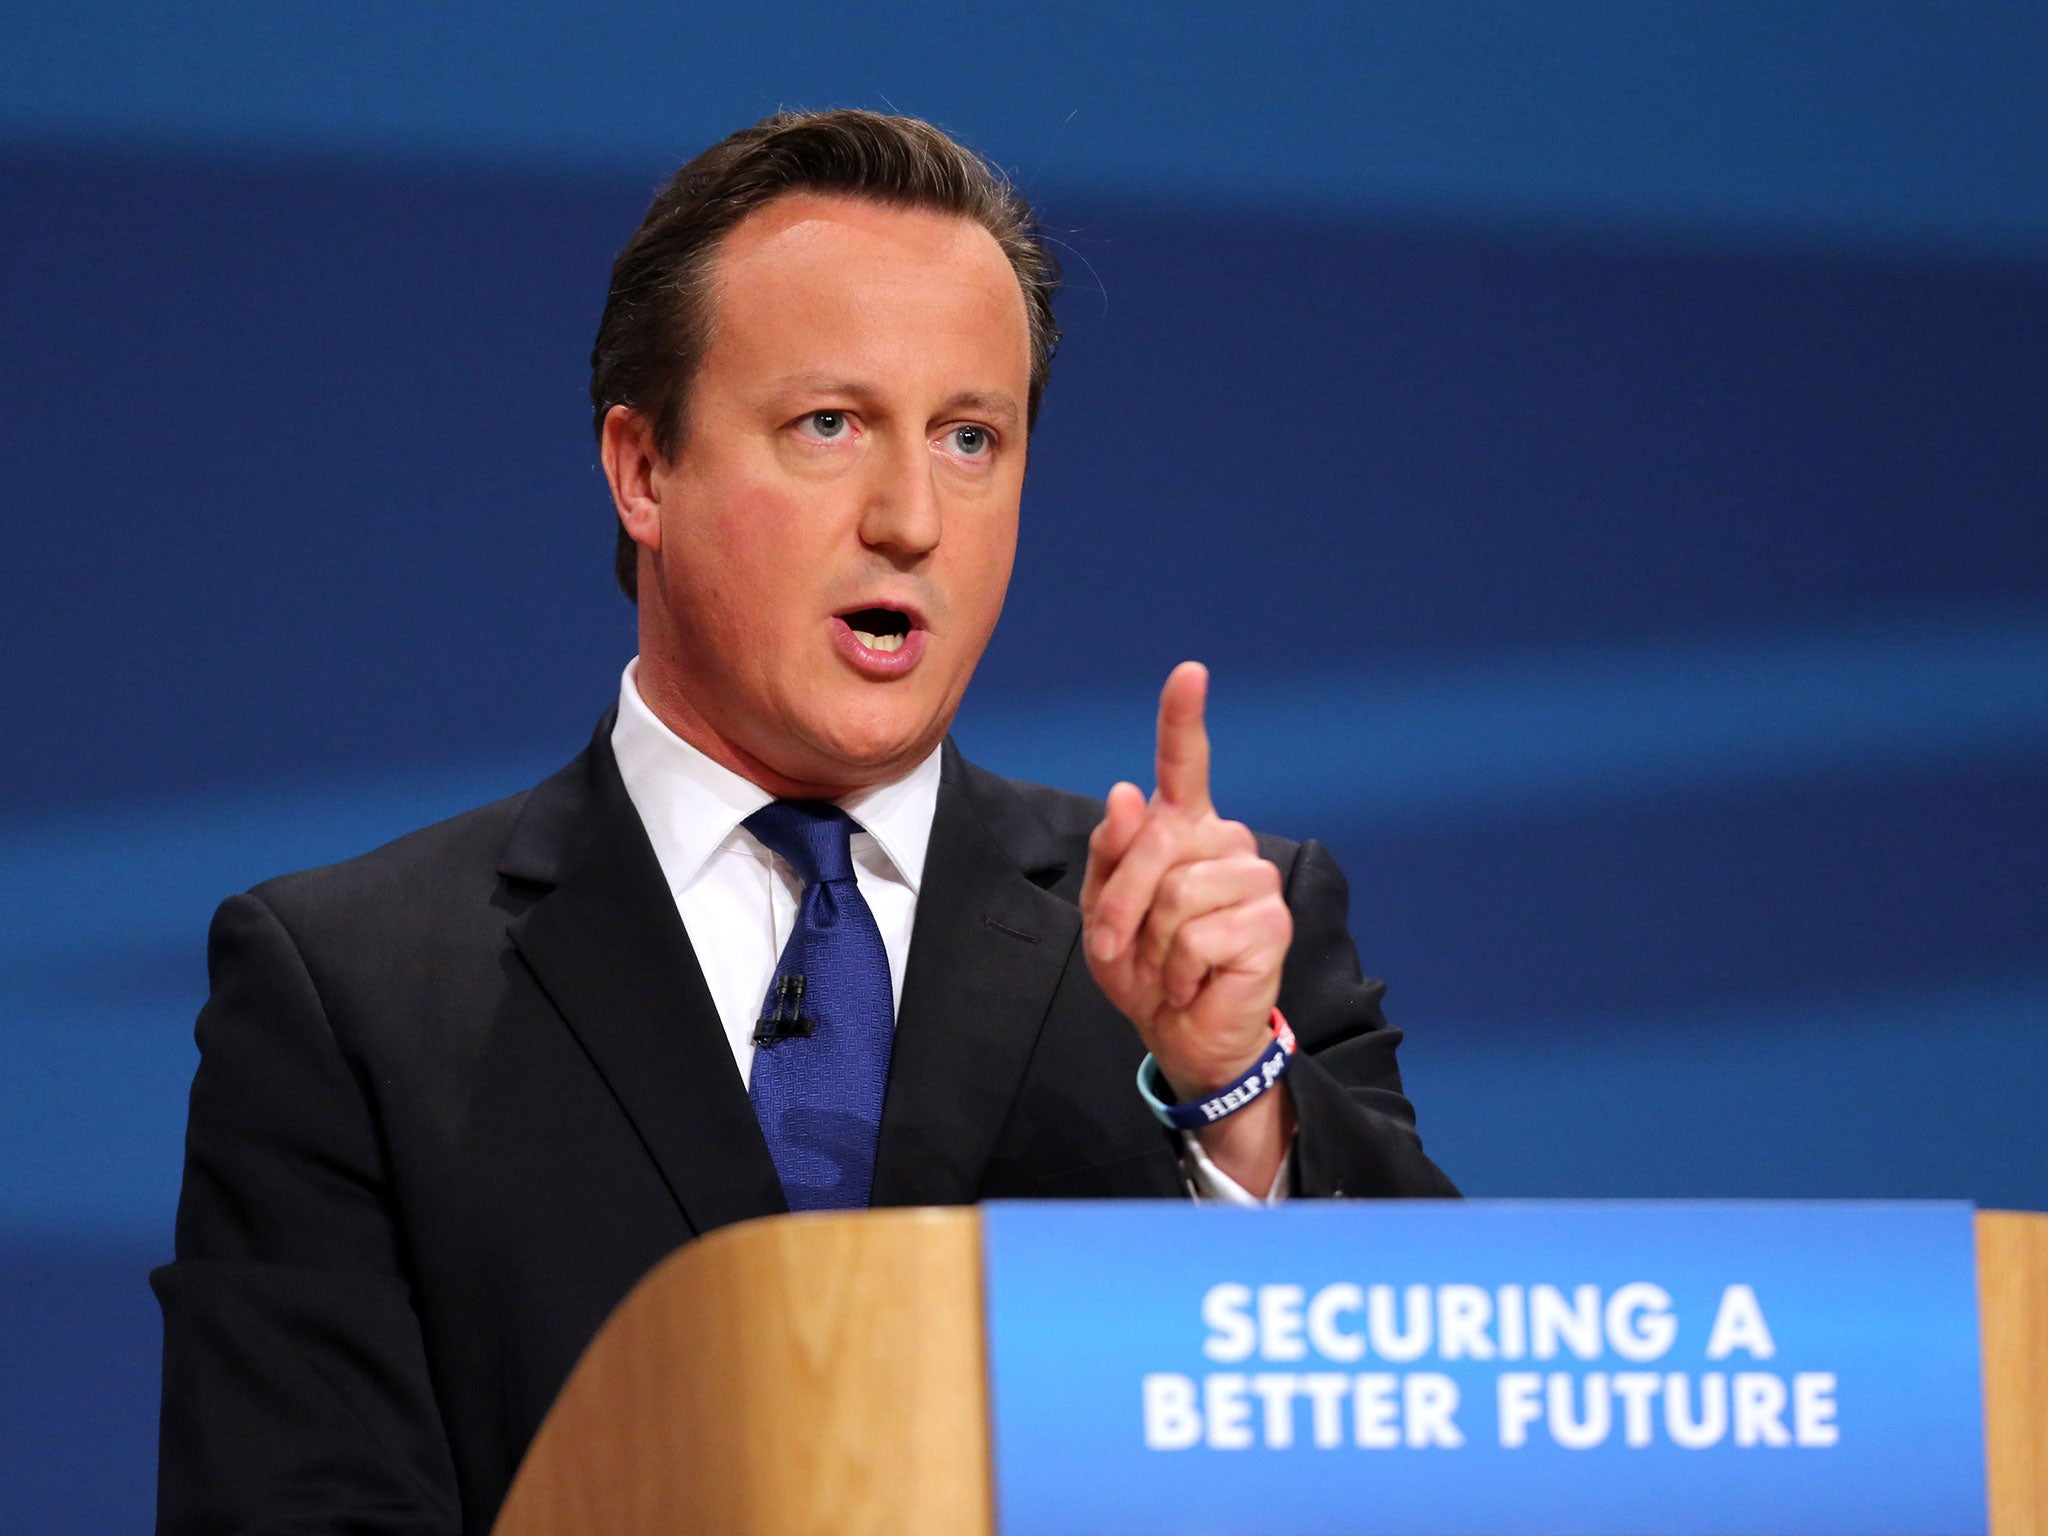 David Cameron gives a speech to the Confederation of British Industry (CBI)